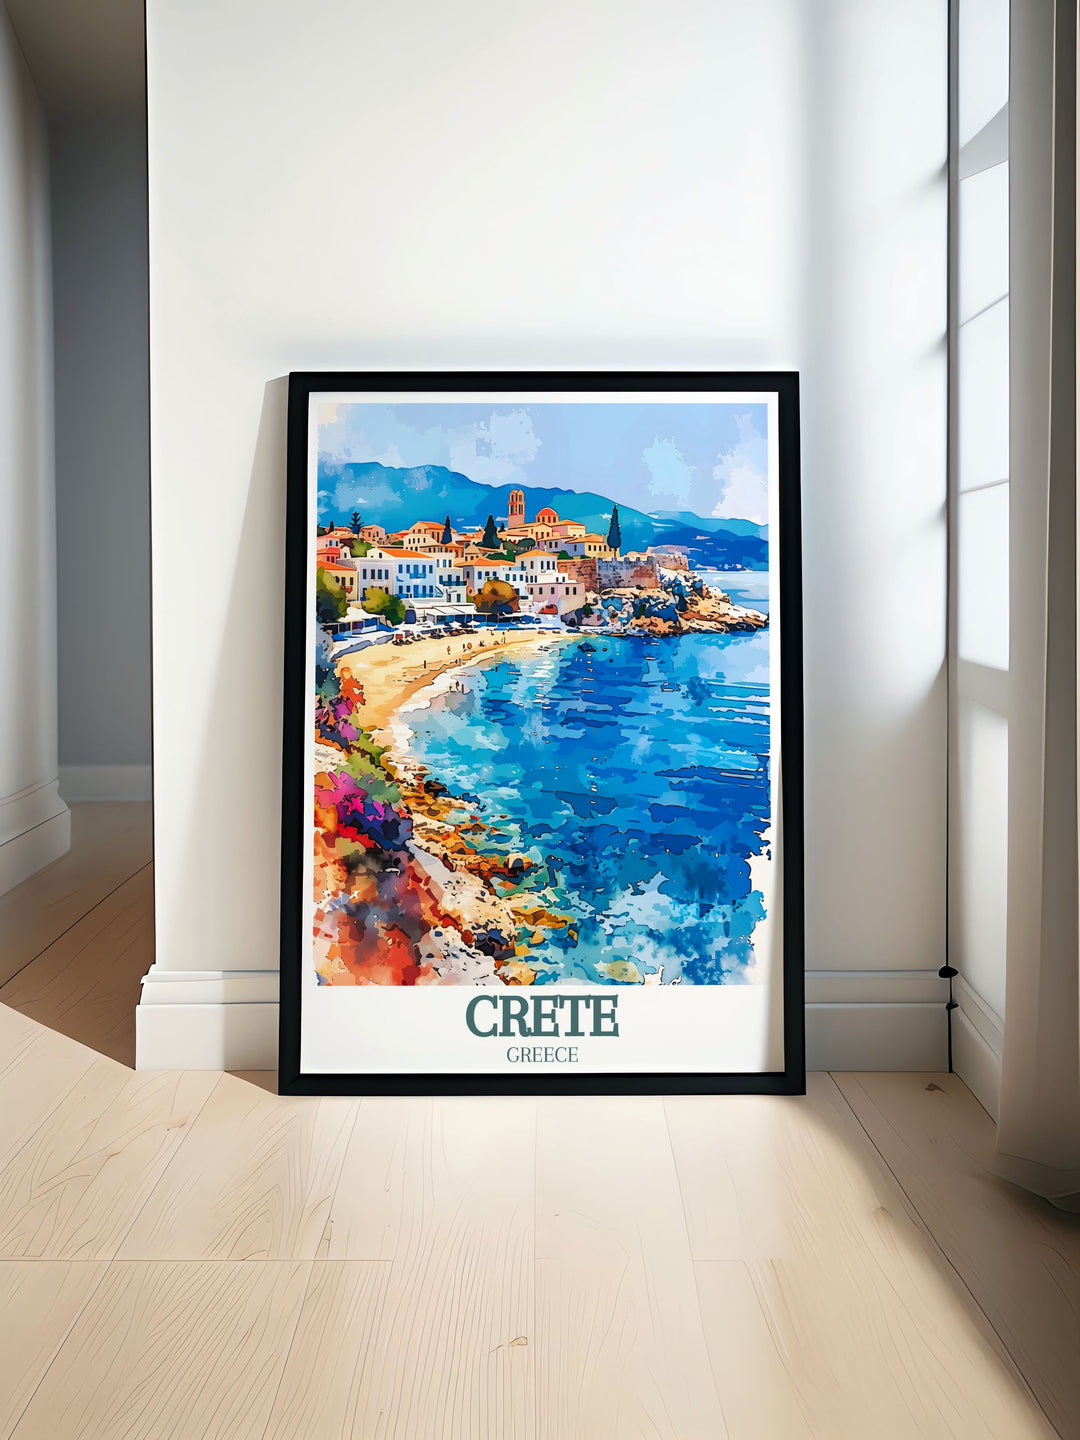 Celebrate the natural beauty of Balos Beach with this high quality art print. Featuring the pristine lagoon and pink sands, this travel poster brings a piece of Cretes coastal paradise into your home, ideal for enhancing your decor or gifting to beach lovers.